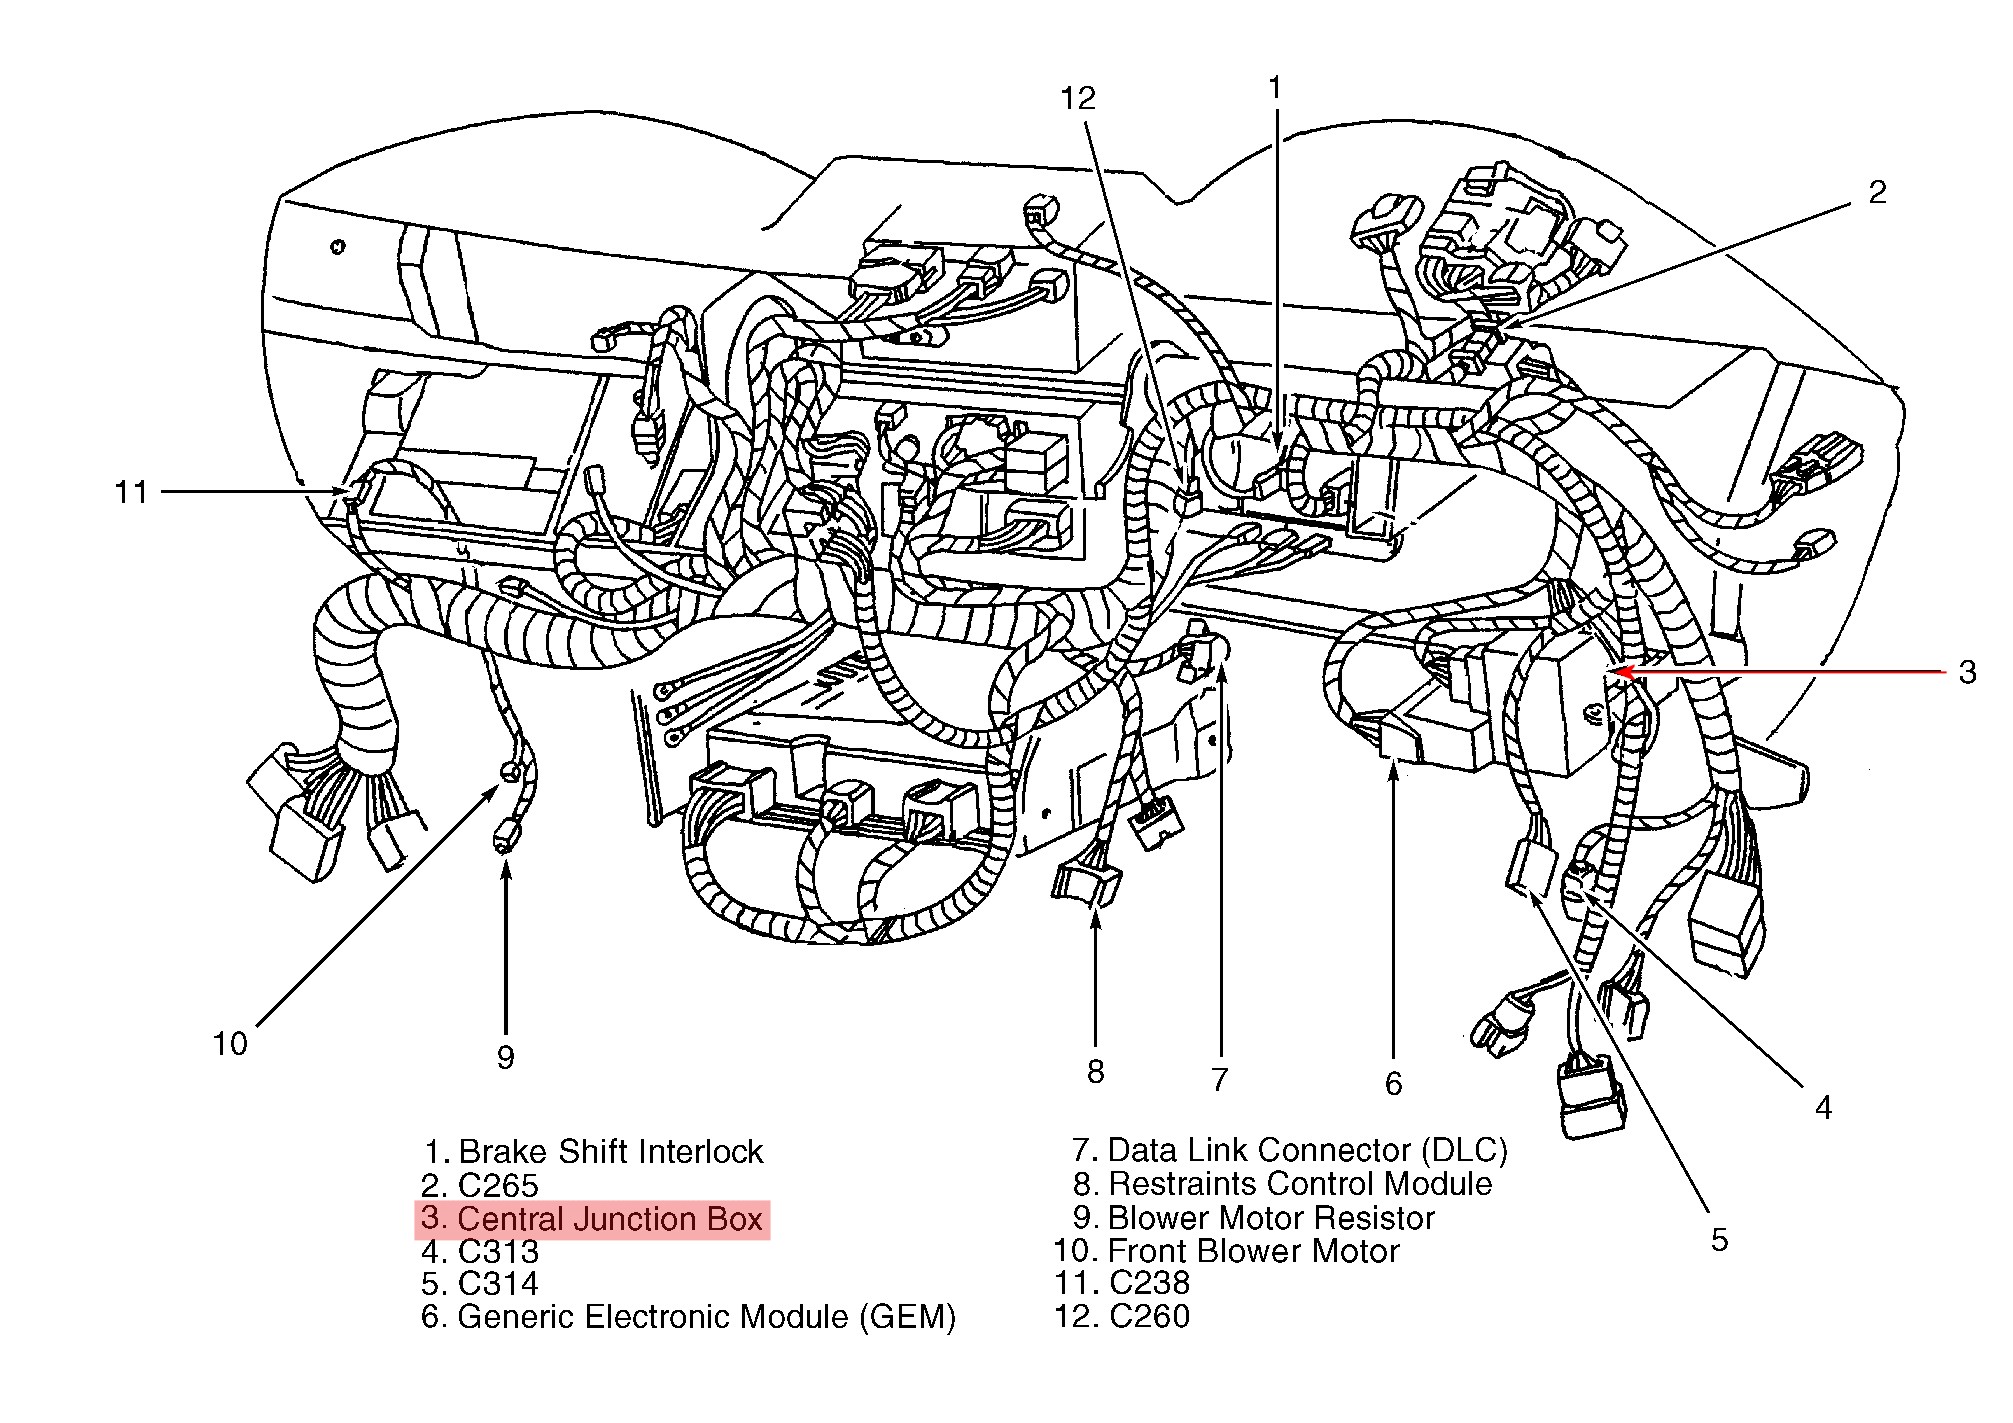 2005 ford Explorer Engine Diagram 1986 ford Mustang Fuse Box Wiring Diagram Of 2005 ford Explorer Engine Diagram